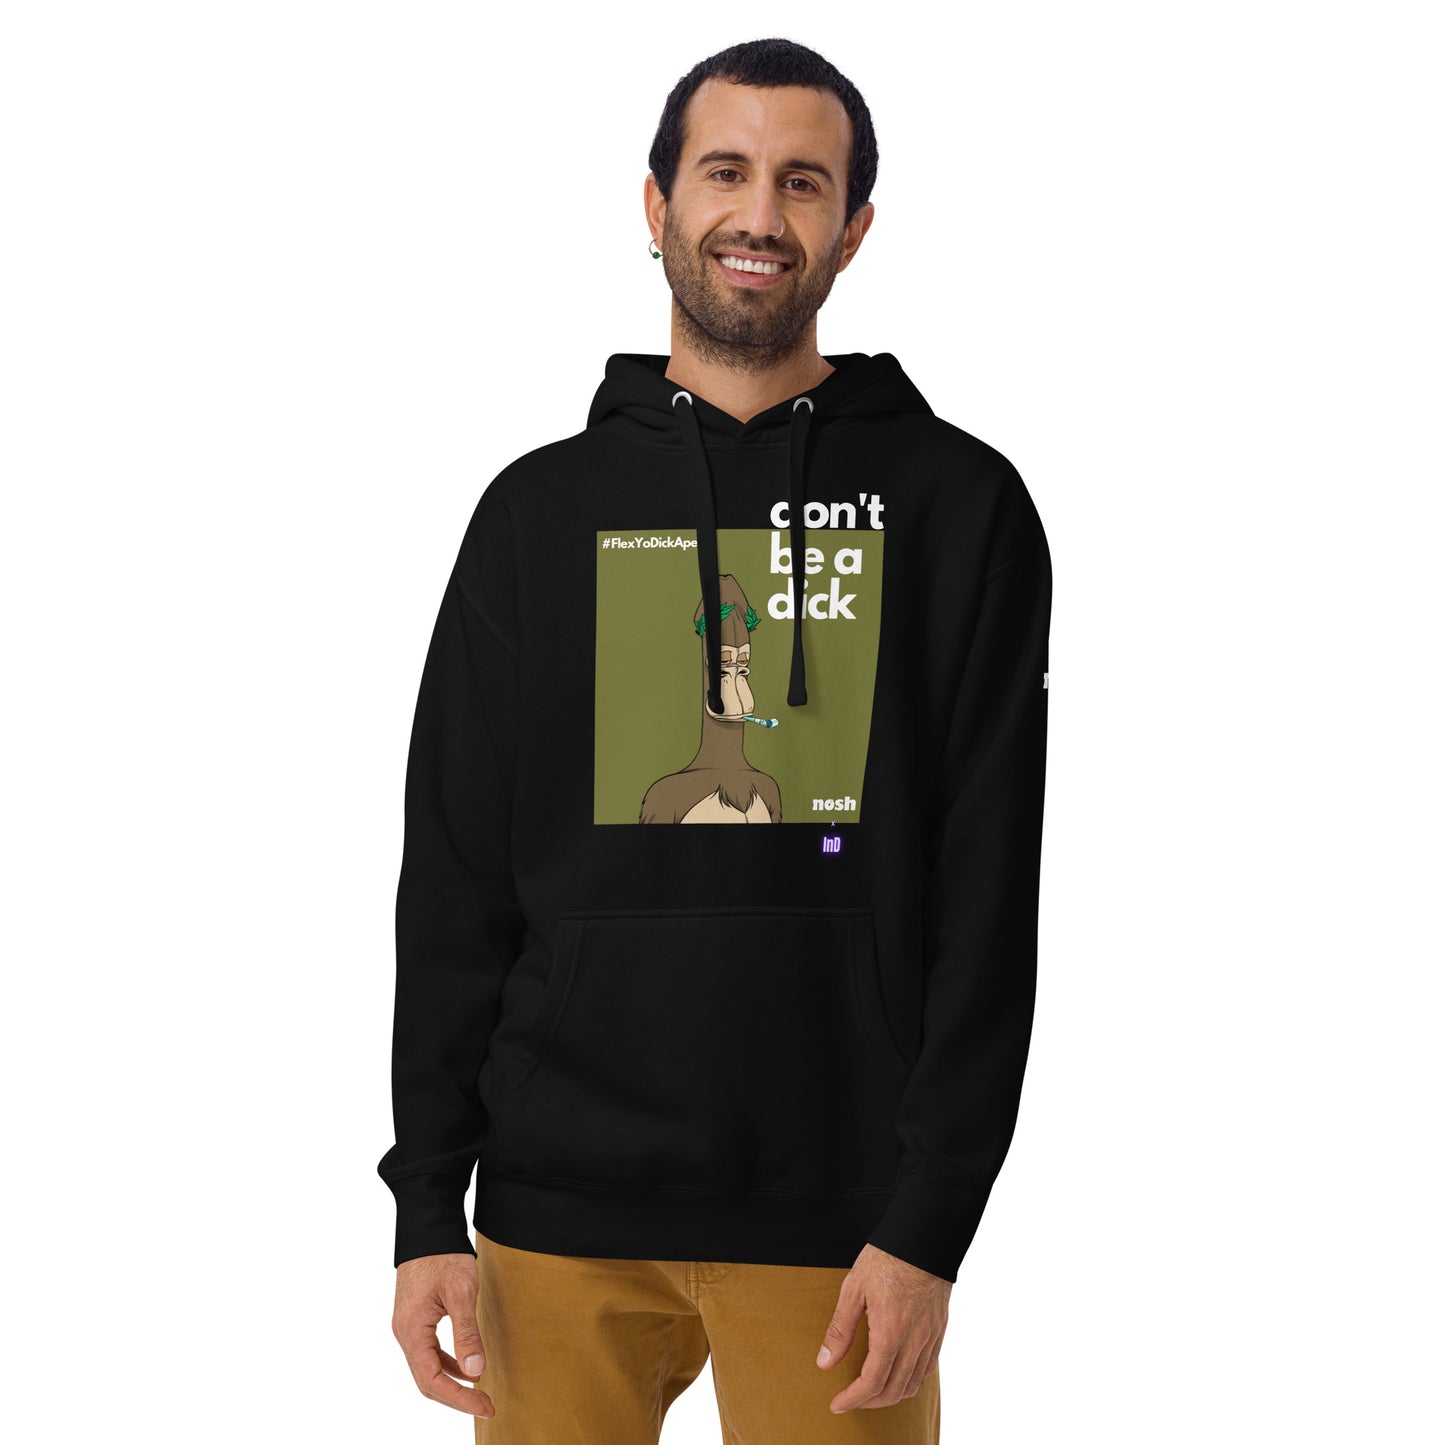 Unisex Premium Cotton Hoodie - don't be a dick #129